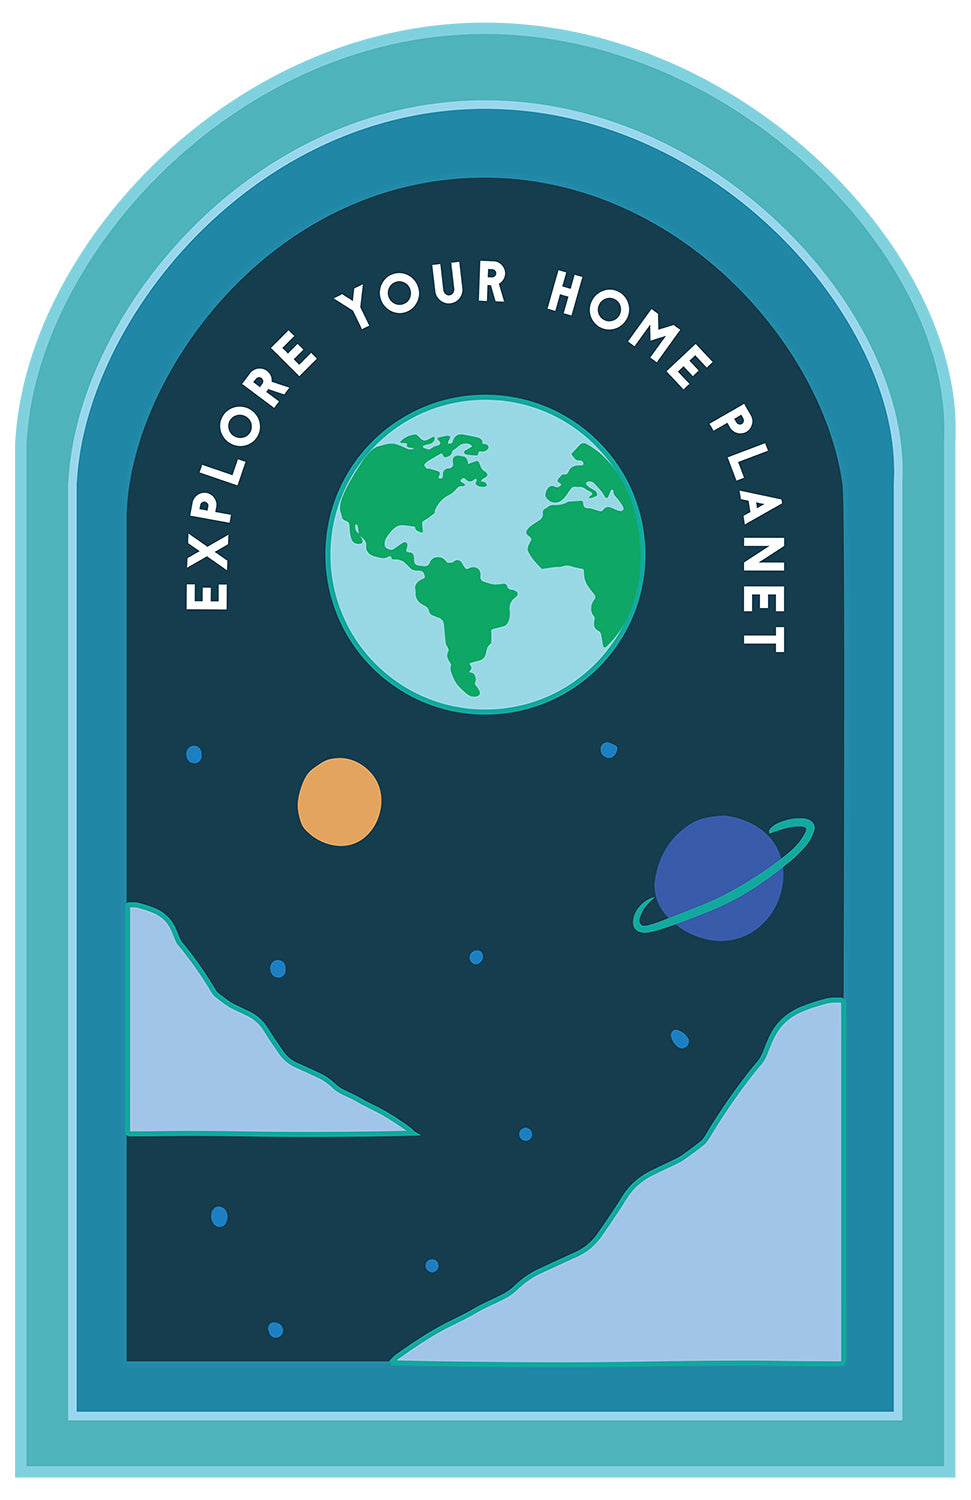 EXPLORE YOUR HOME PLANET